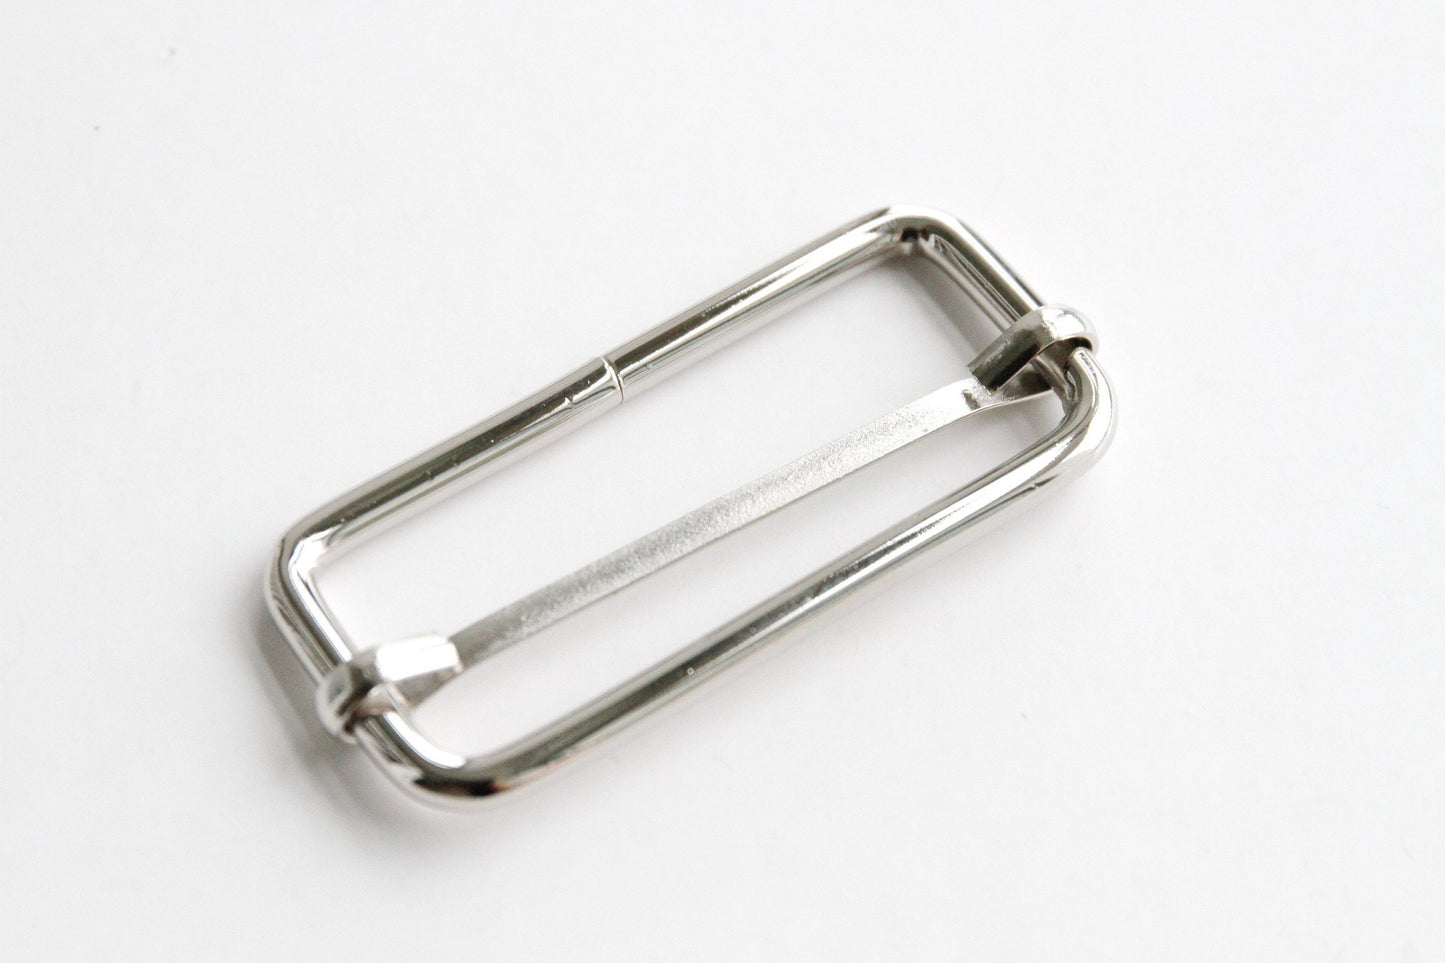 Rectangular Slider - 2 inch, One Movable Pin